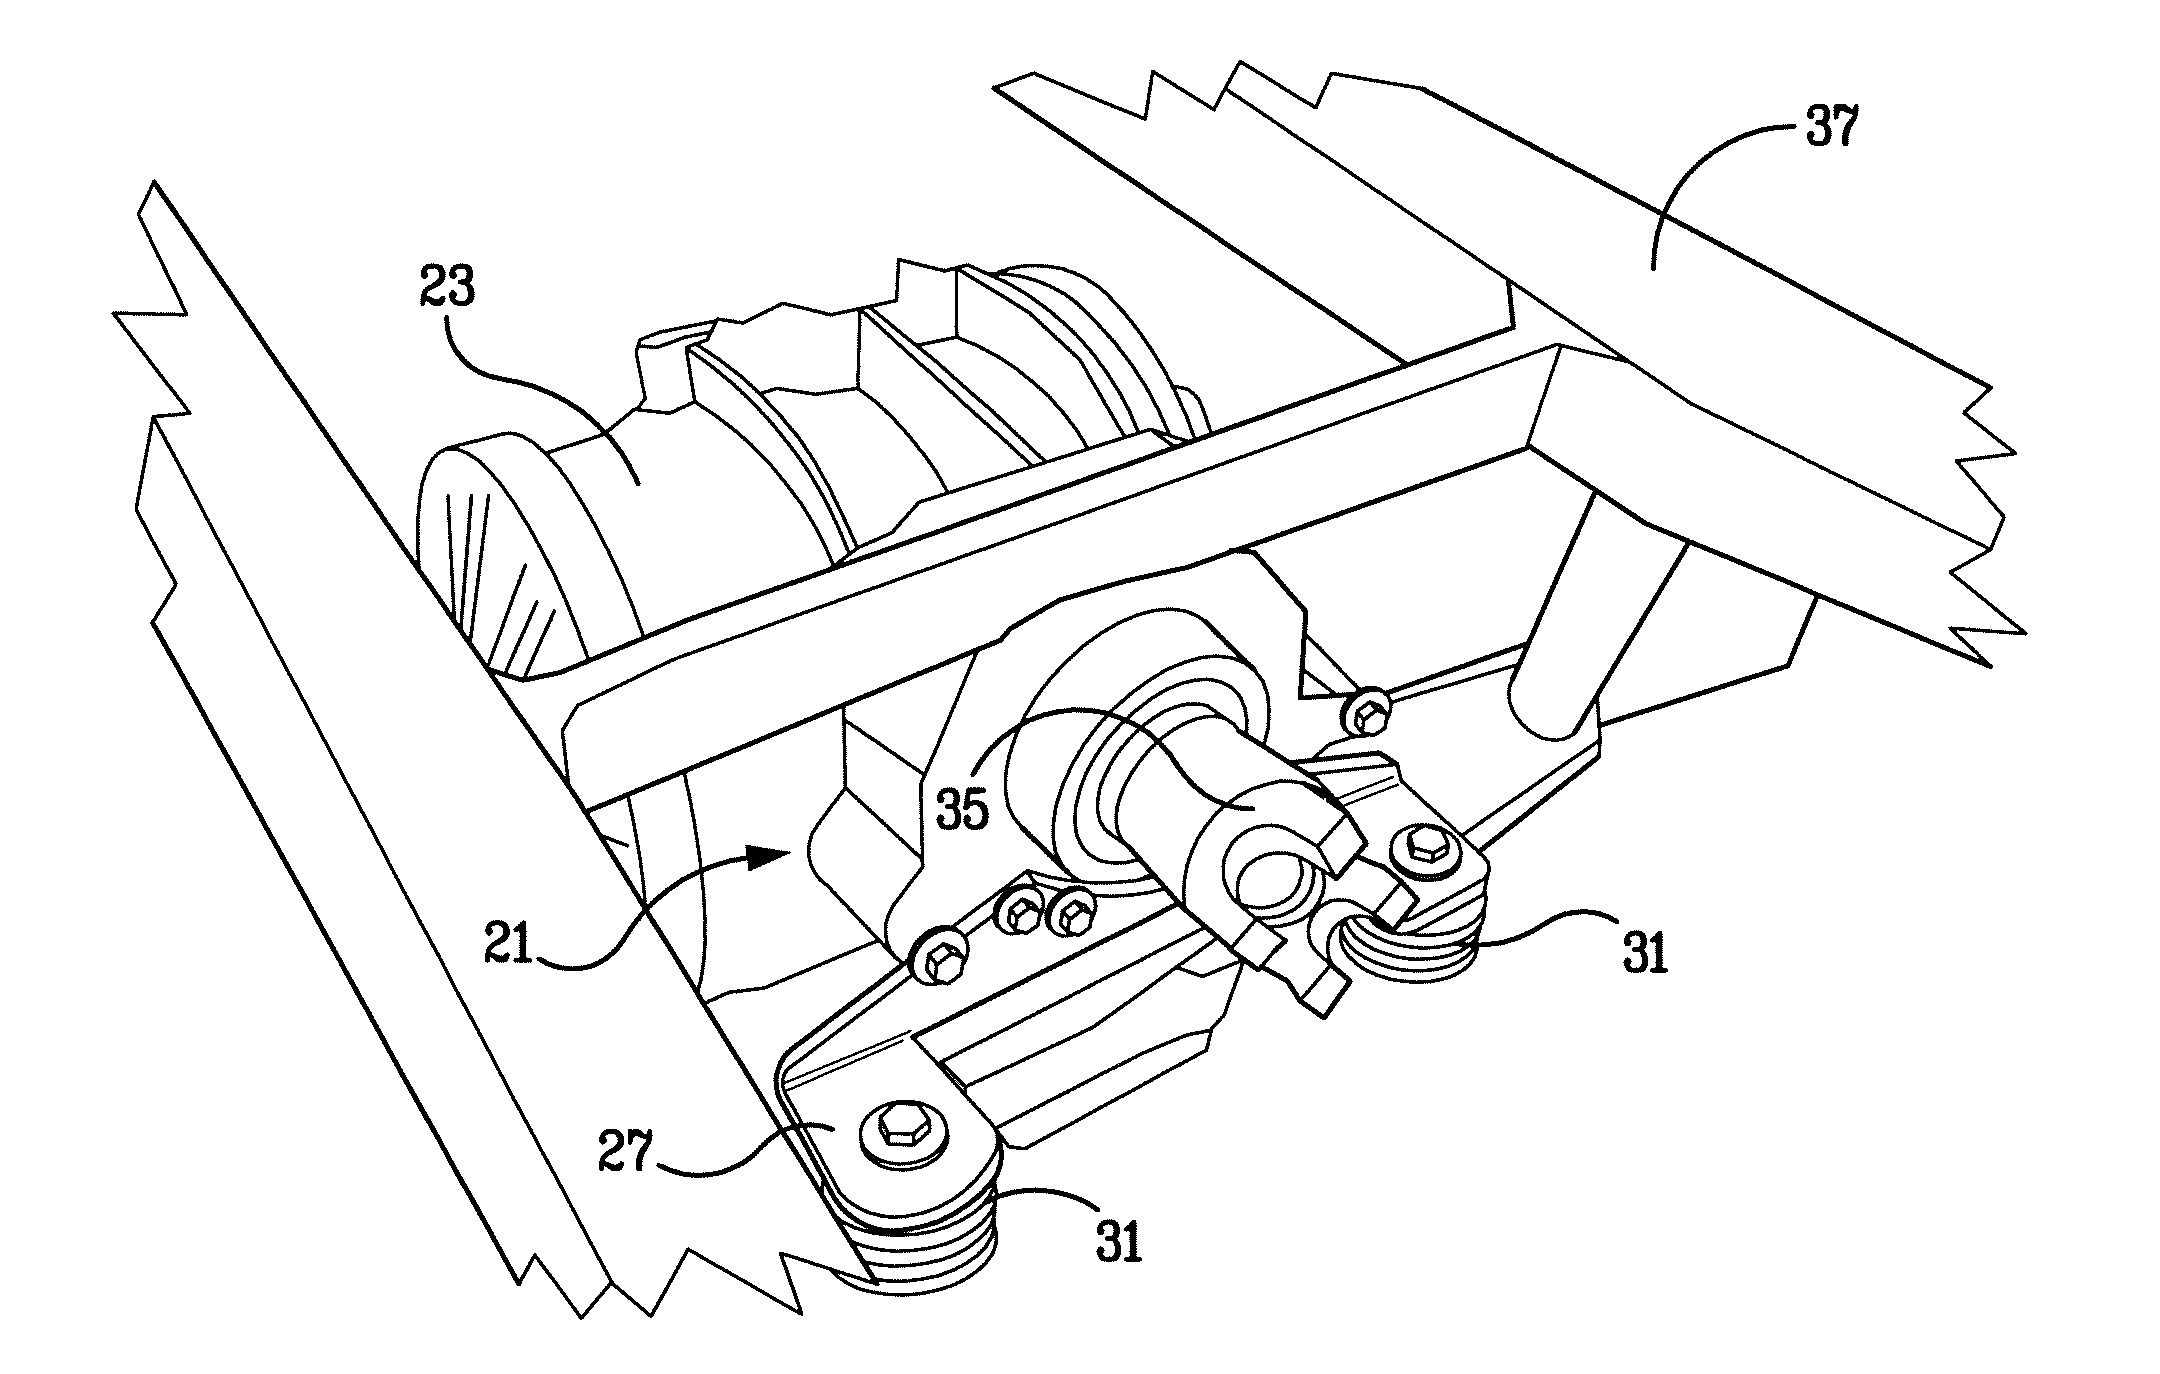 Adapter for a corvette rear differential